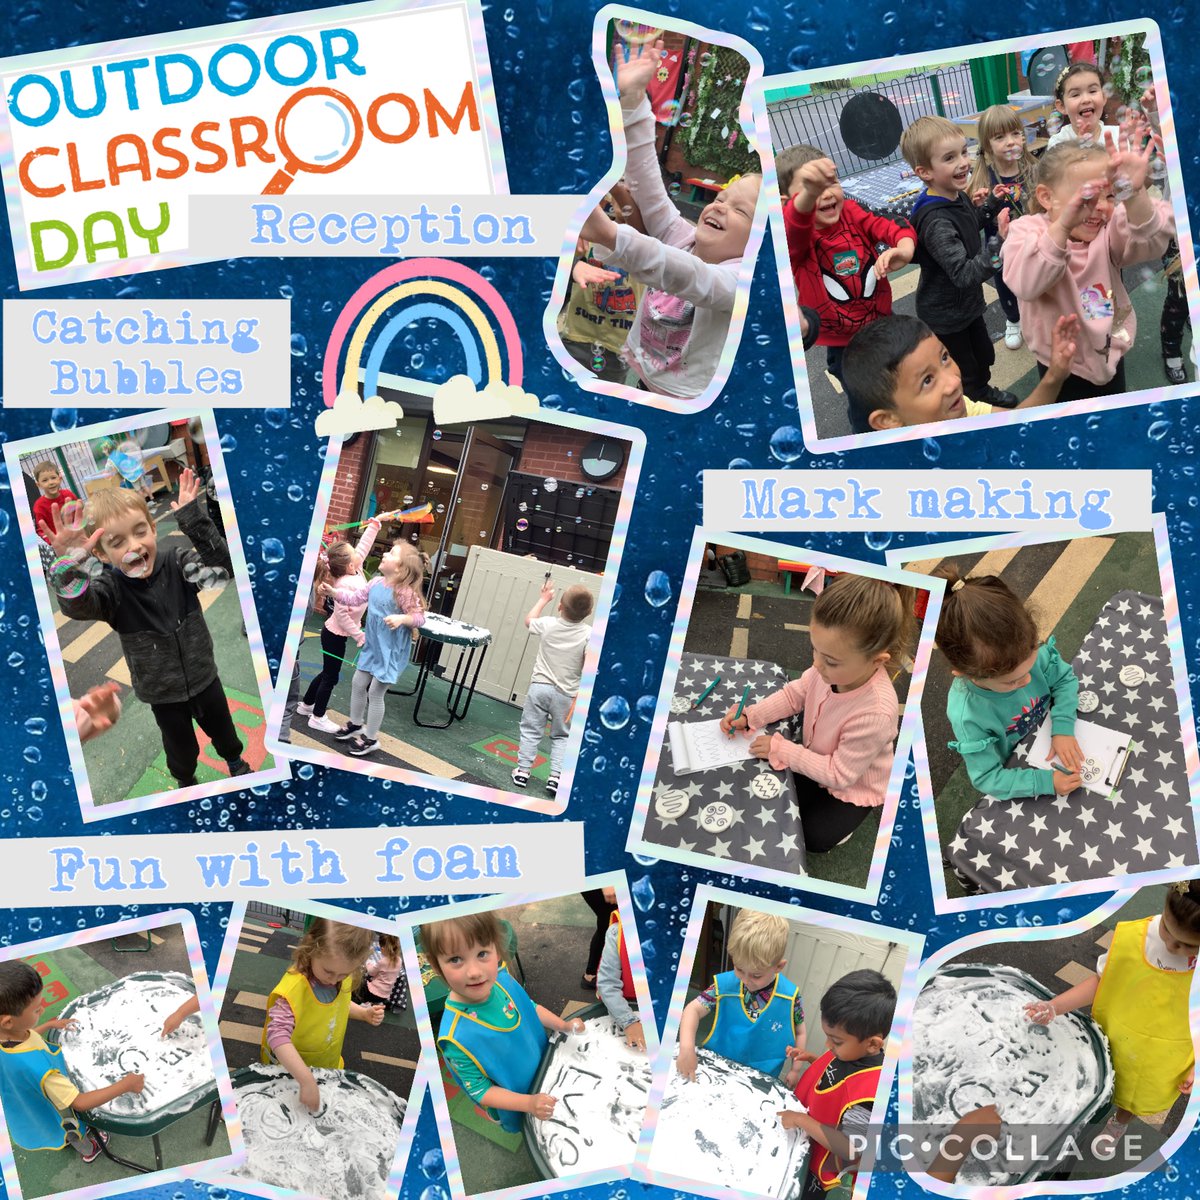 Today was Outdoor Classroom Day and although our plans changed a bit because of the weather ☔️🌧️🤭, we still had lots of fun (under the canopy)!  #holyfamilyeyfs #OutdoorClassroomDay 
Don't worry, our Pirate Treasure Hunt will still go ahead soon 😉🏴‍☠️☀️!